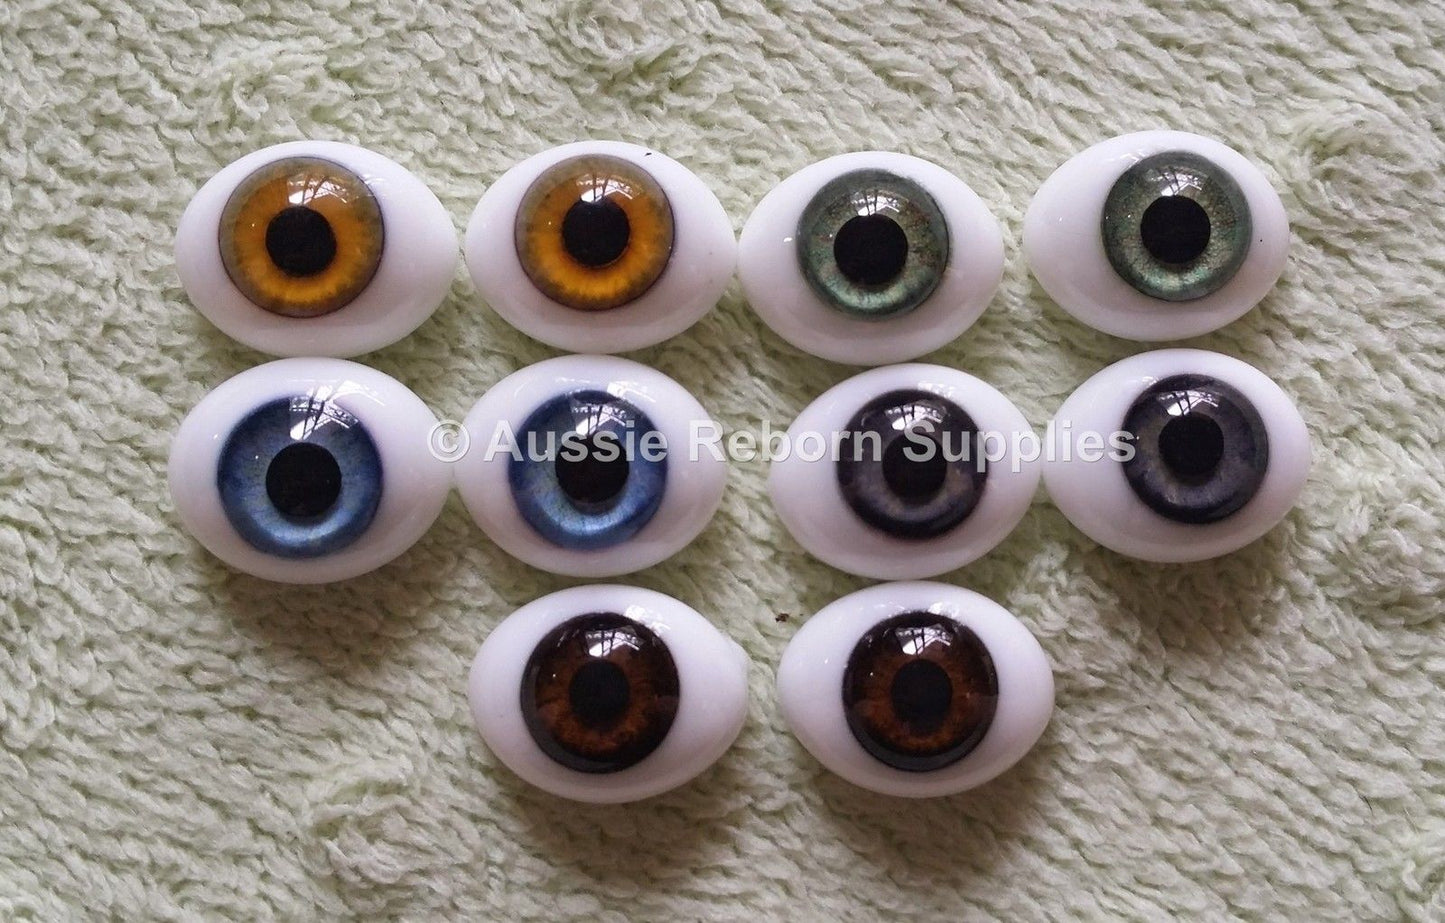 16mm Meadow Green  Oval Glass Eyes Reborn Baby Doll Making Supplies